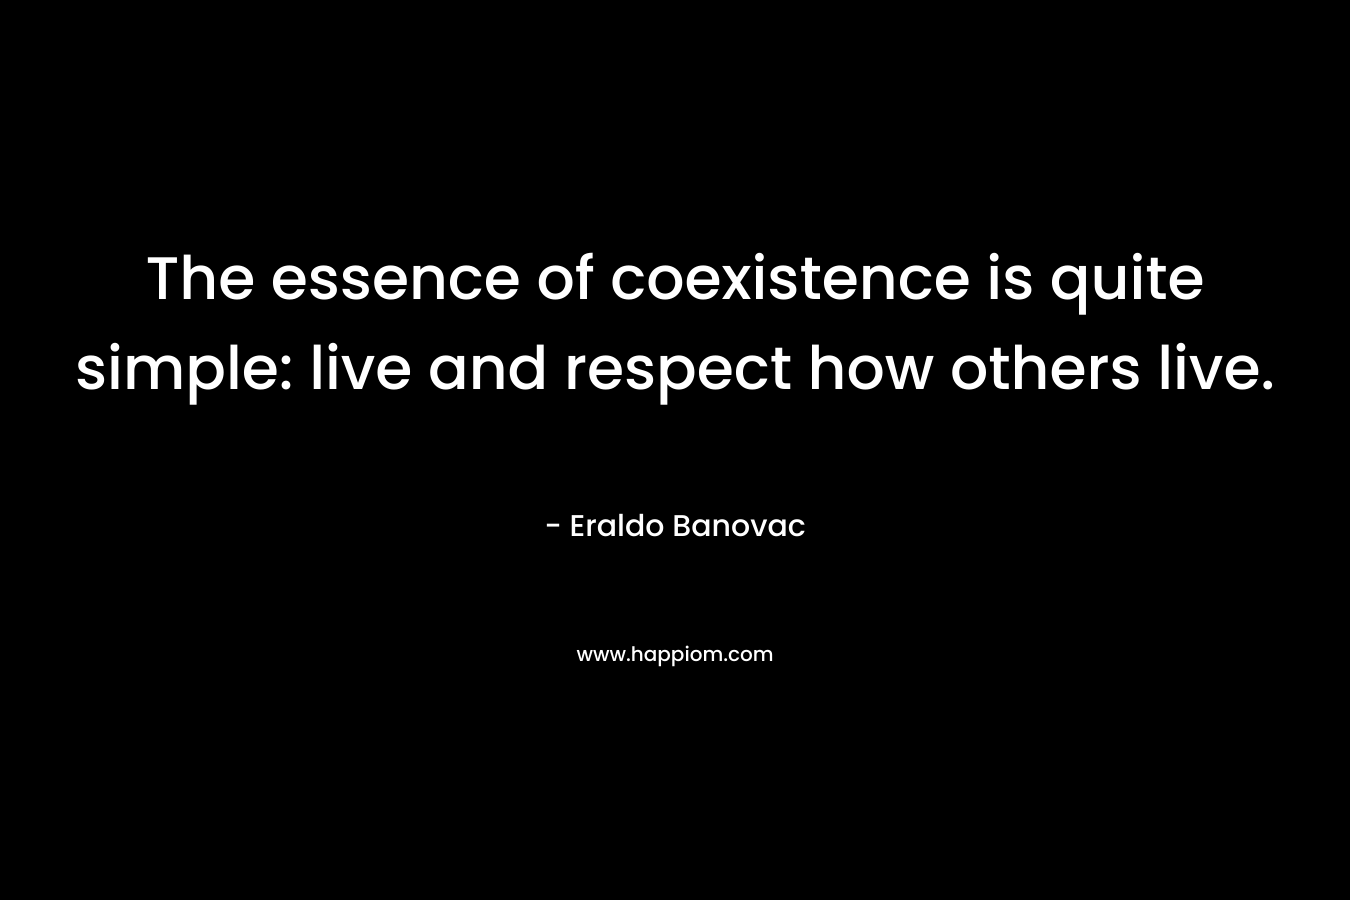 The essence of coexistence is quite simple: live and respect how others live. – Eraldo Banovac